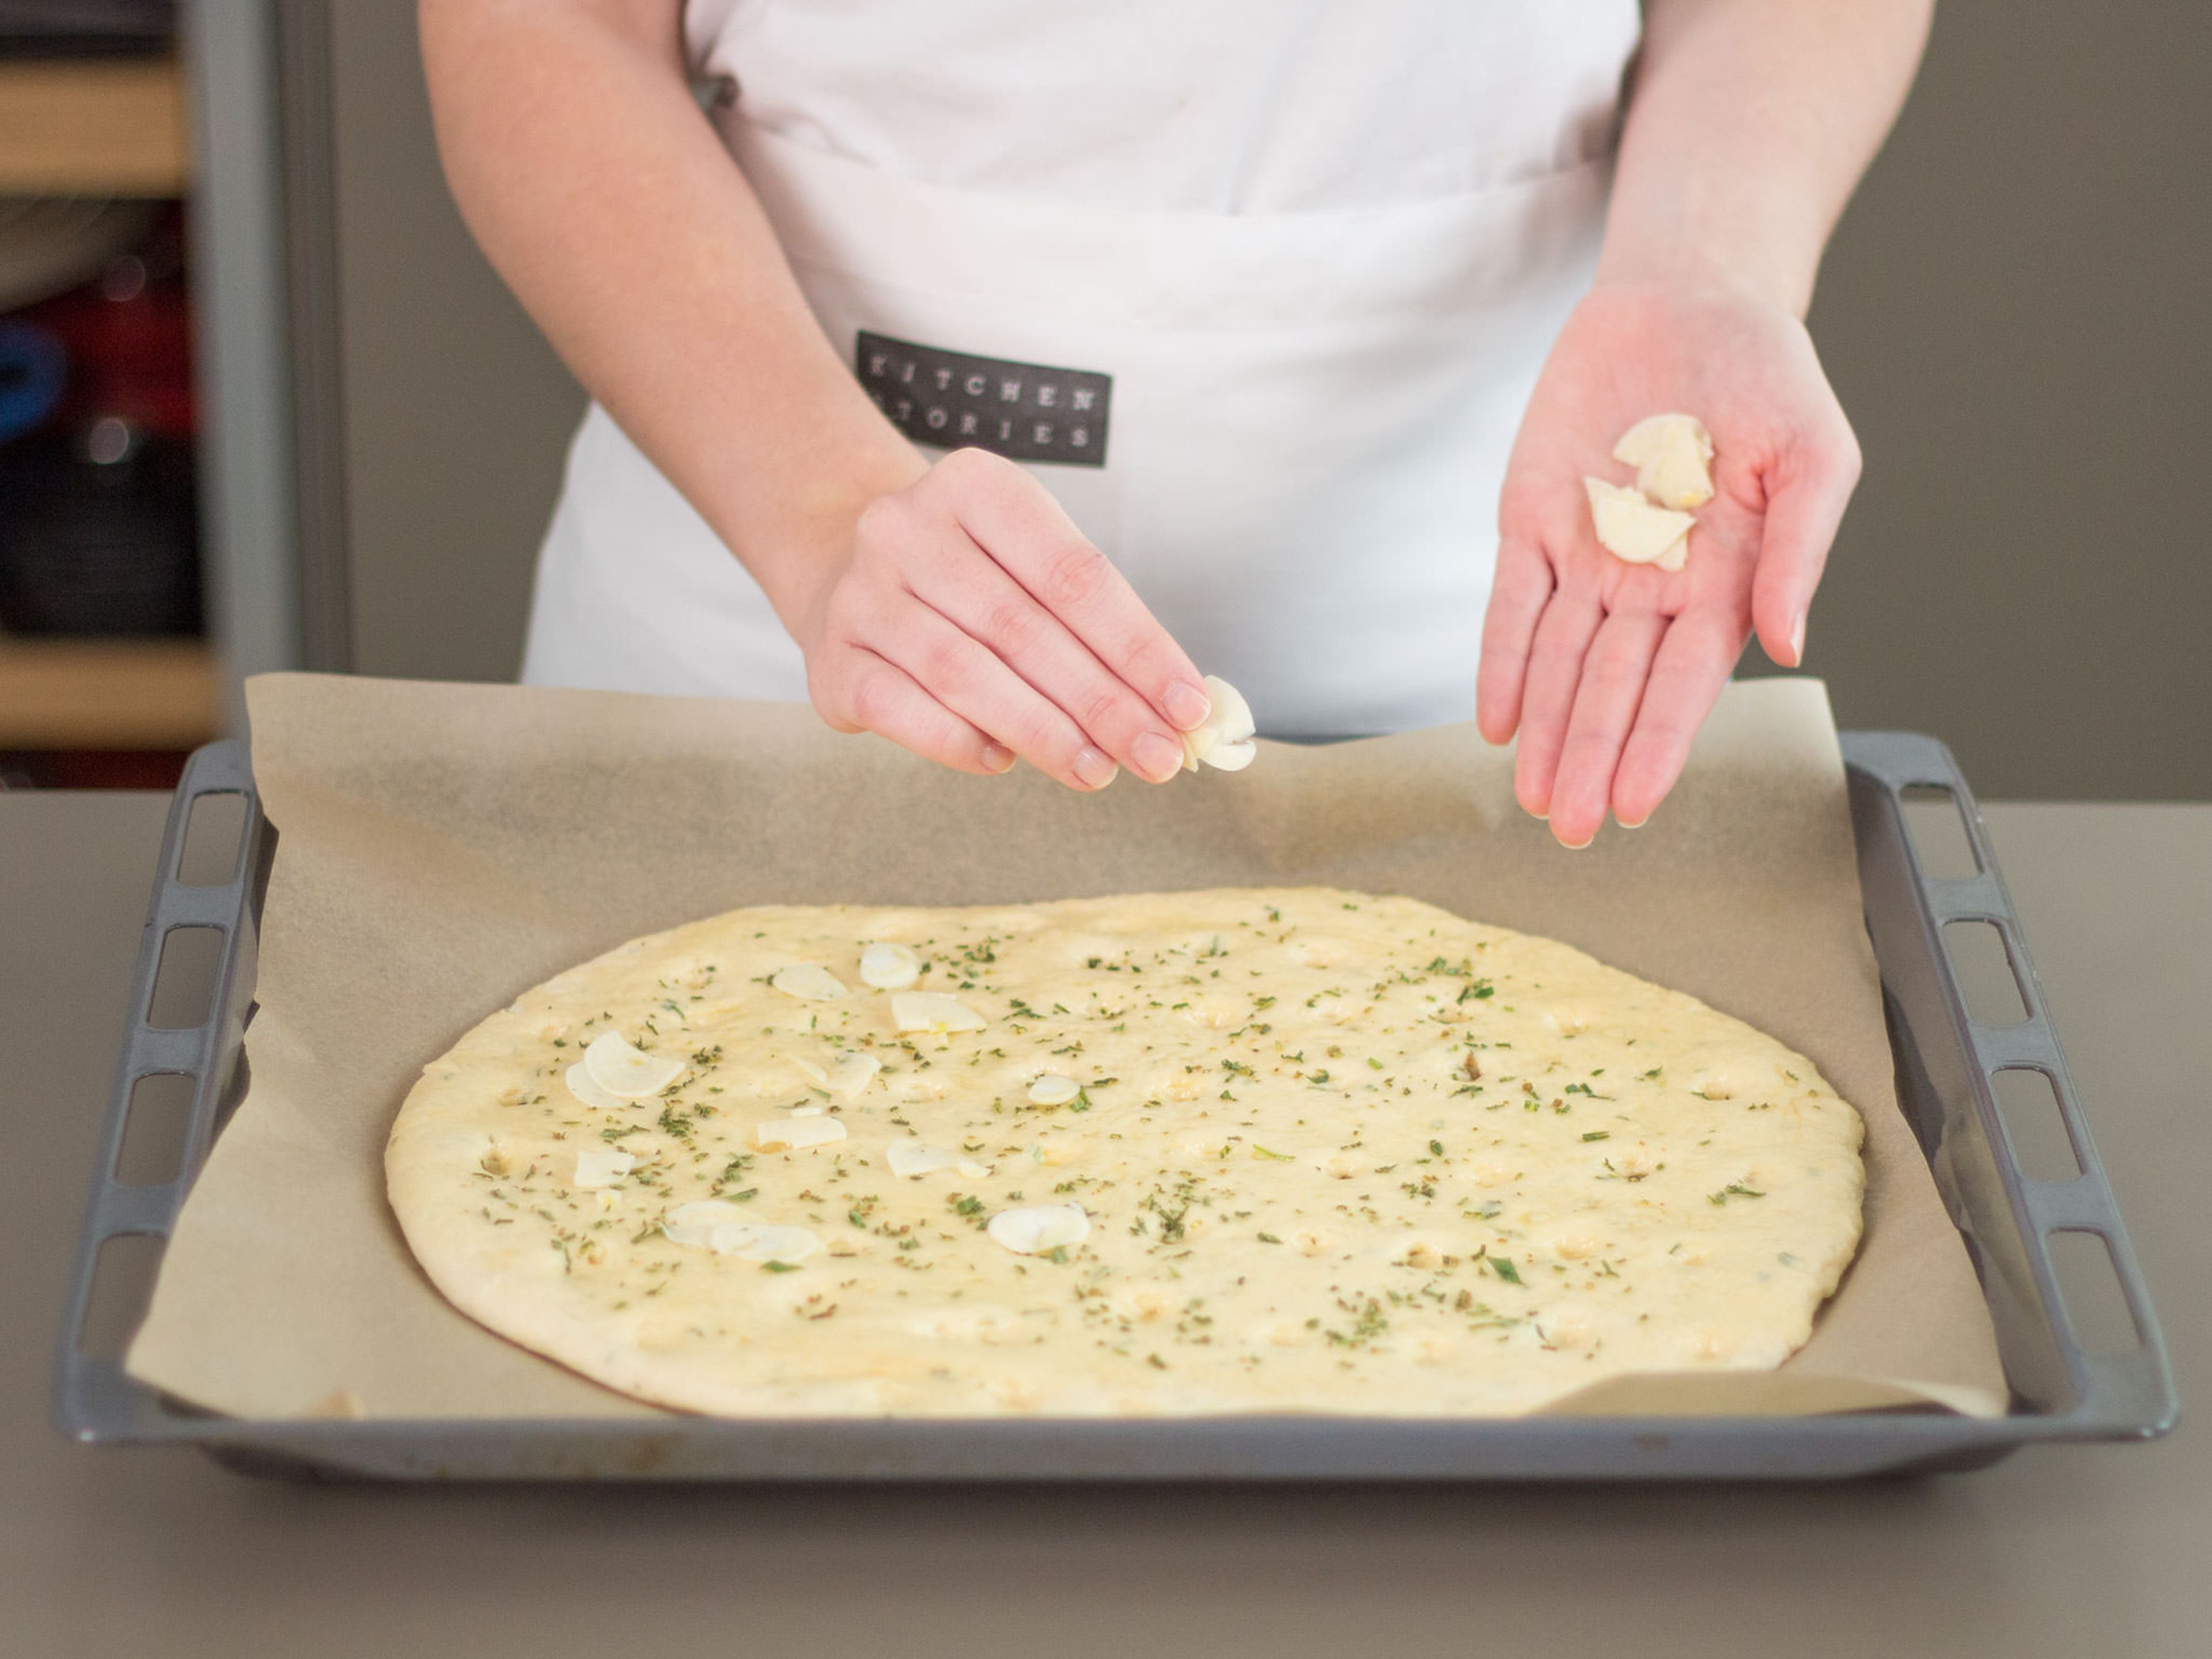 Flatten out dough until it is approx. the thickness of your thumb. Transfer to a parchment-lined baking sheet. Lightly press holes into the surface of dough with index finger. Cover dough again, then, preheat oven to 200°C/400°F. Before placing dough in oven, once again lightly press holes into its surface with index finger. Brush with olive oil and garnish with rest of garlic and rosemary. Bake in preheated oven at 200°C/400°F. for approx. 20 – 25 min. Remove from oven and sprinkle with sea salt. Enjoy!